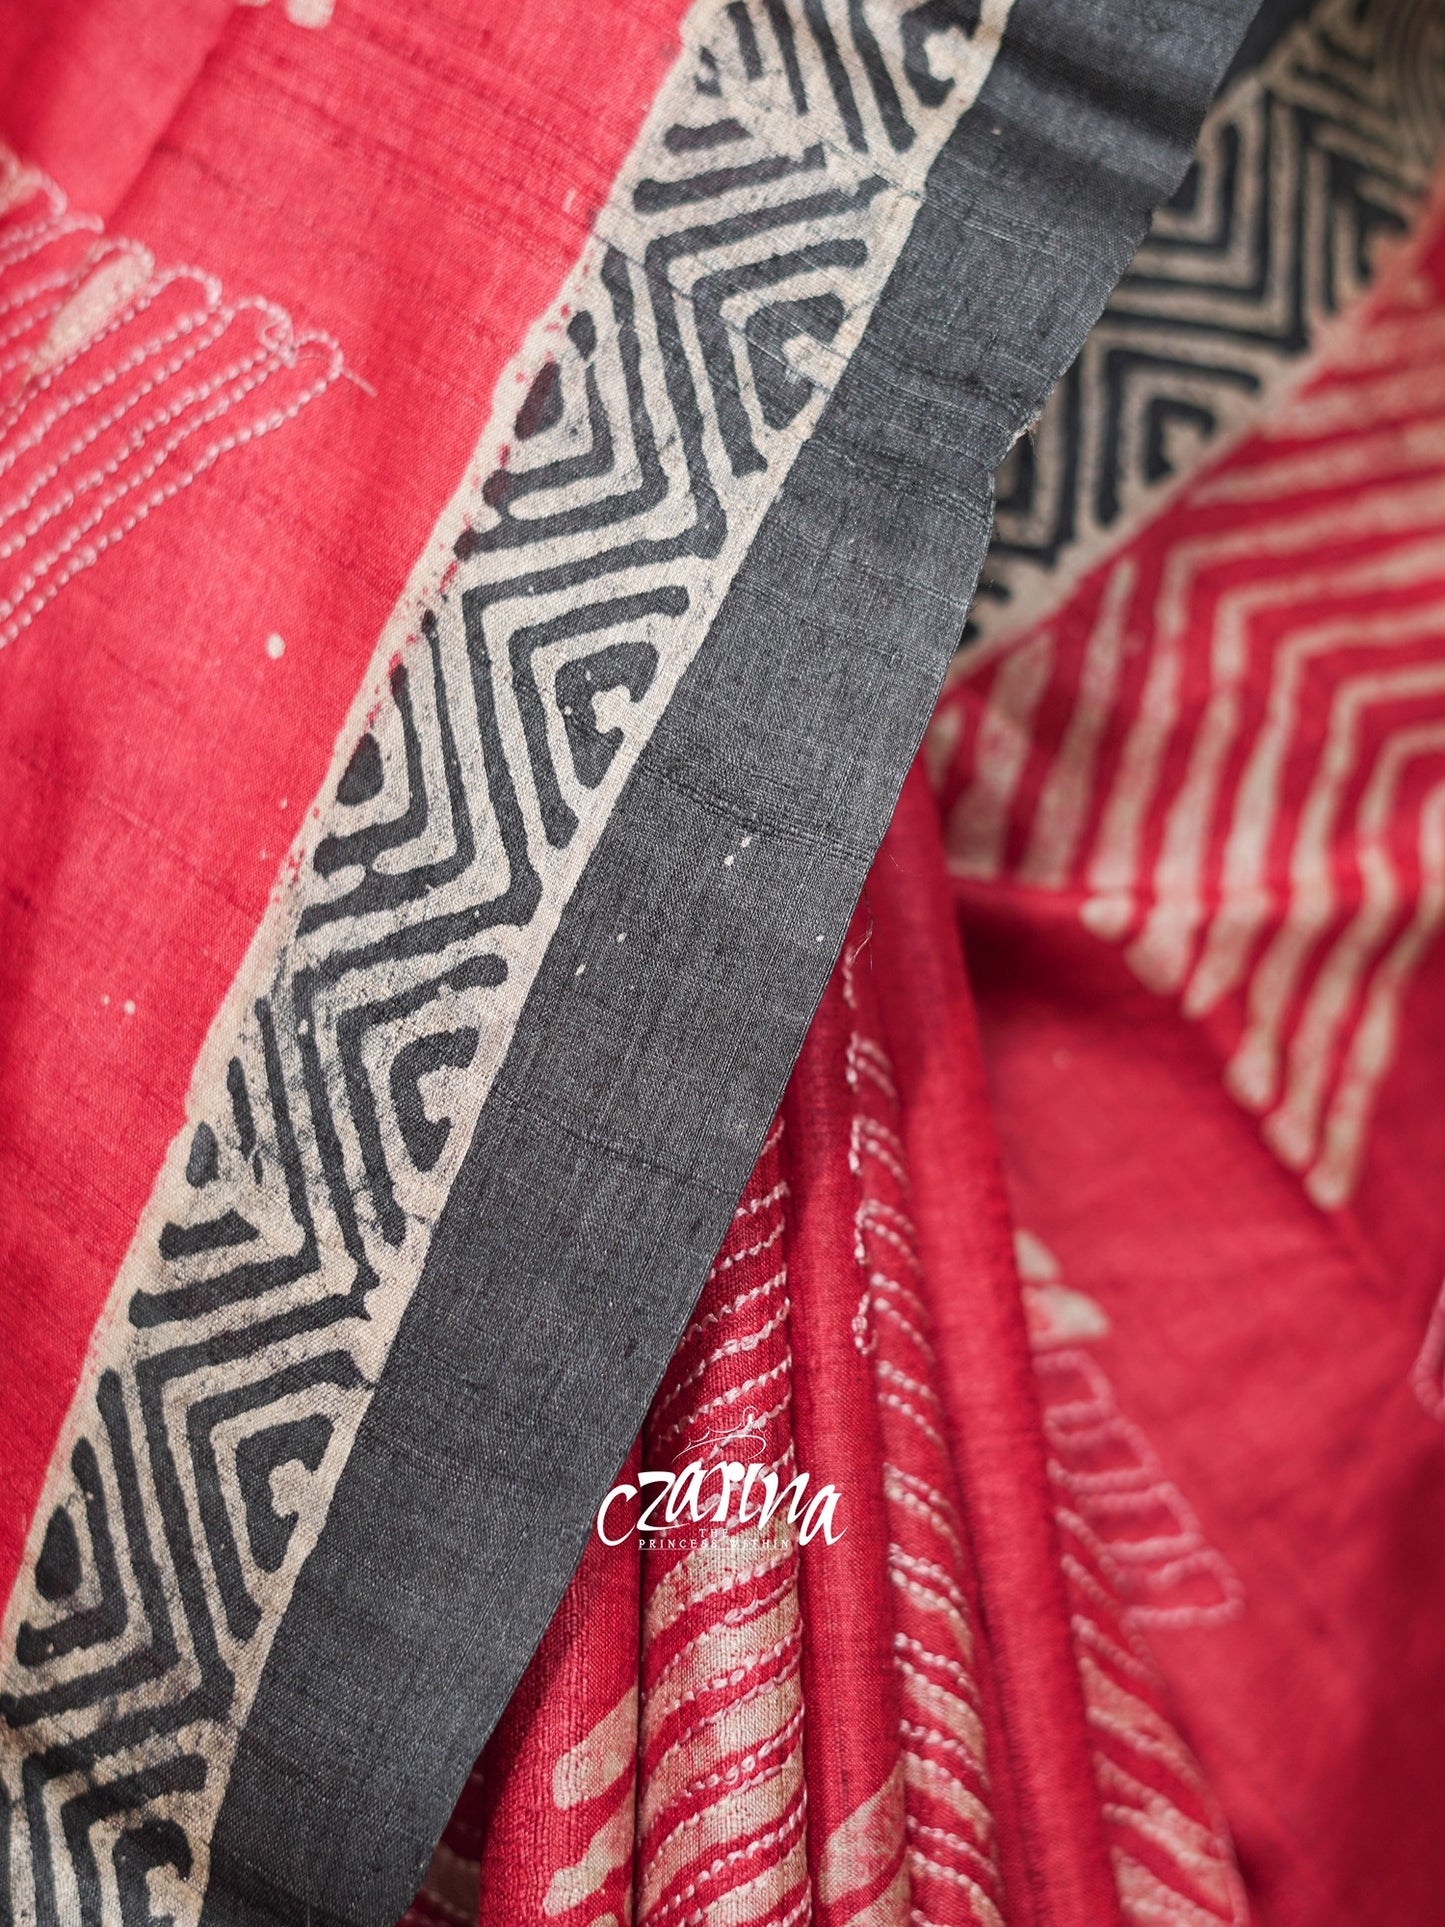 RED AND BLACK PRINTED WITH KANTHA HIGHLIGHTS TUSSAR SILK SAREE